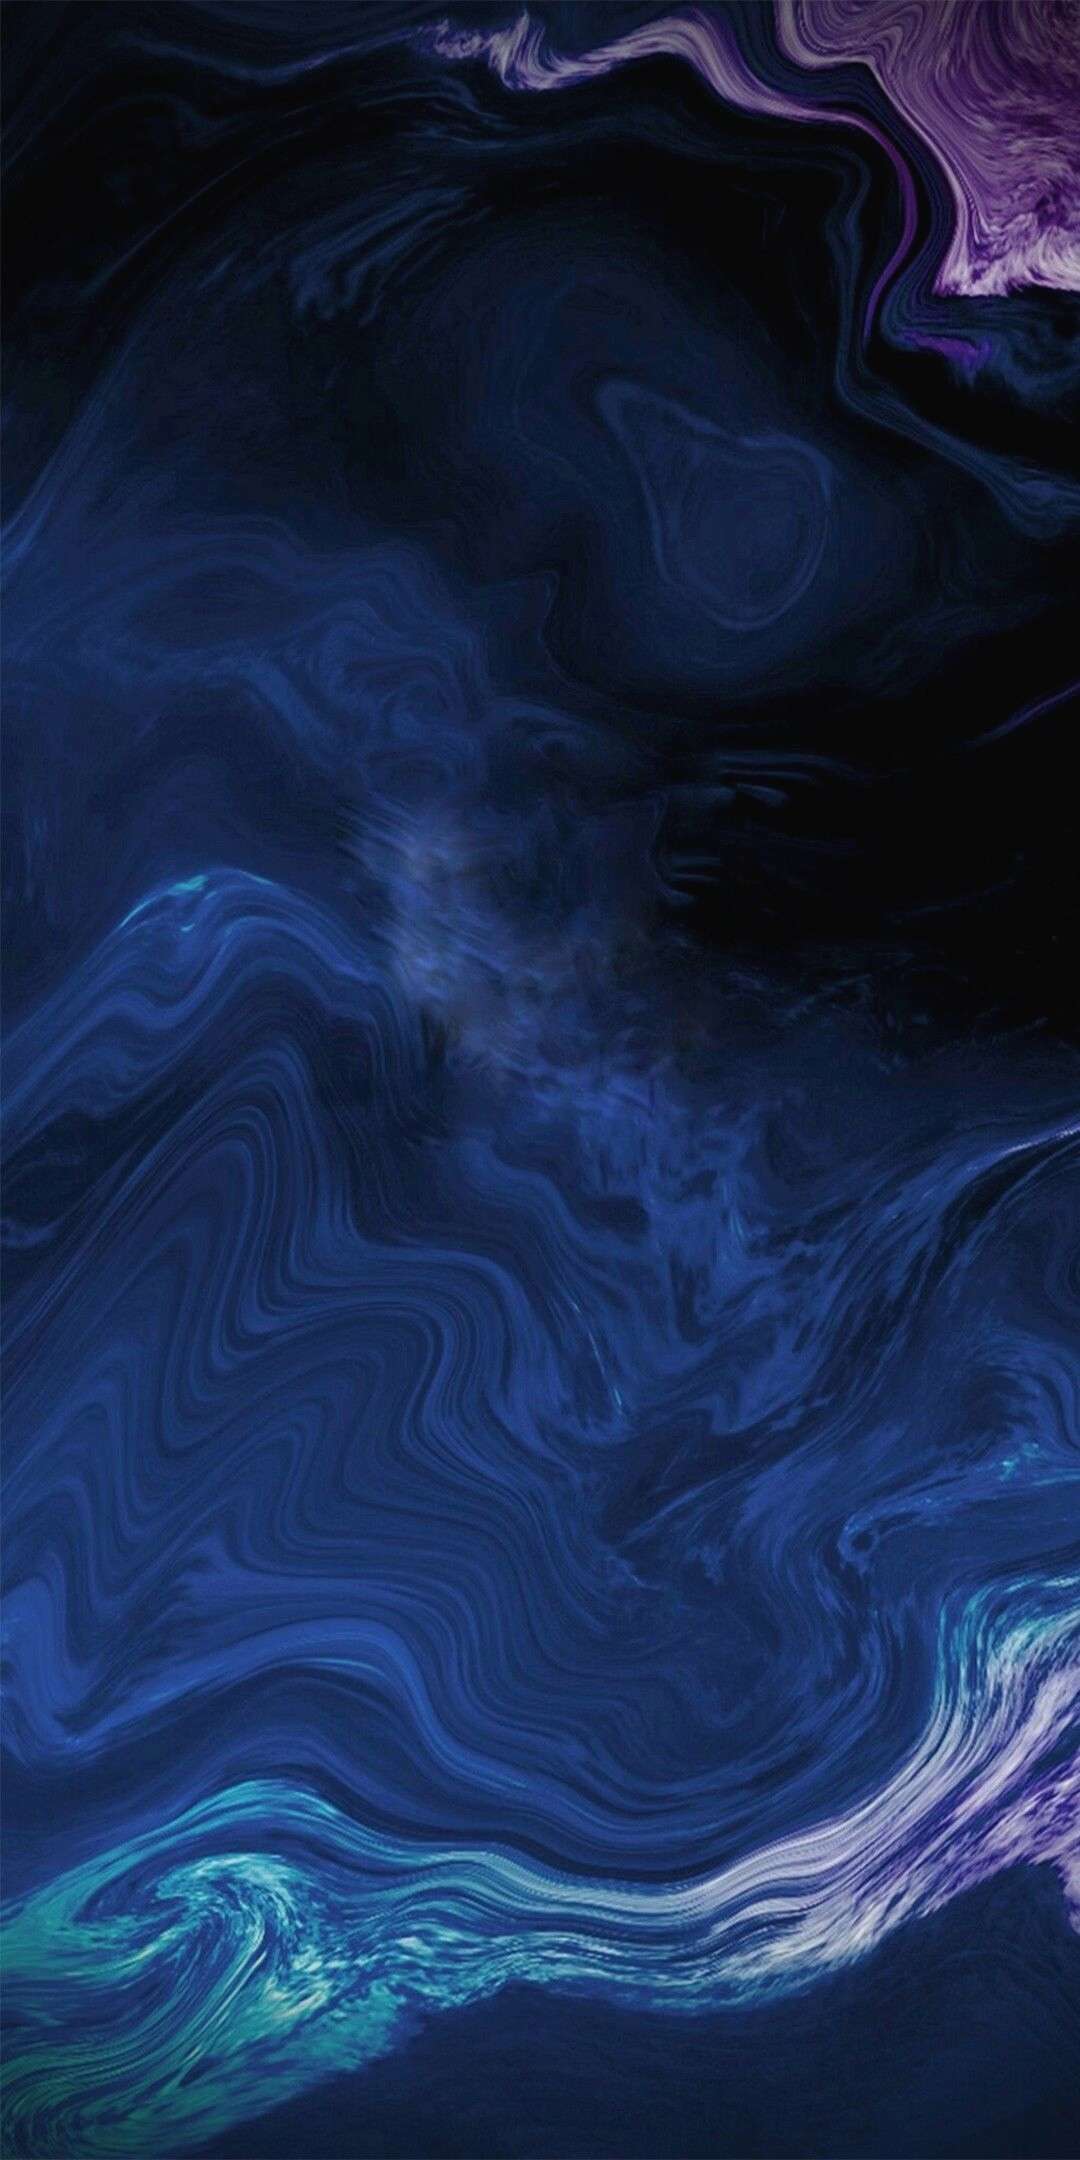 1080 X 2160 Blue and Black Wallpapers - Top Free 1080 X 2160 Blue and ...